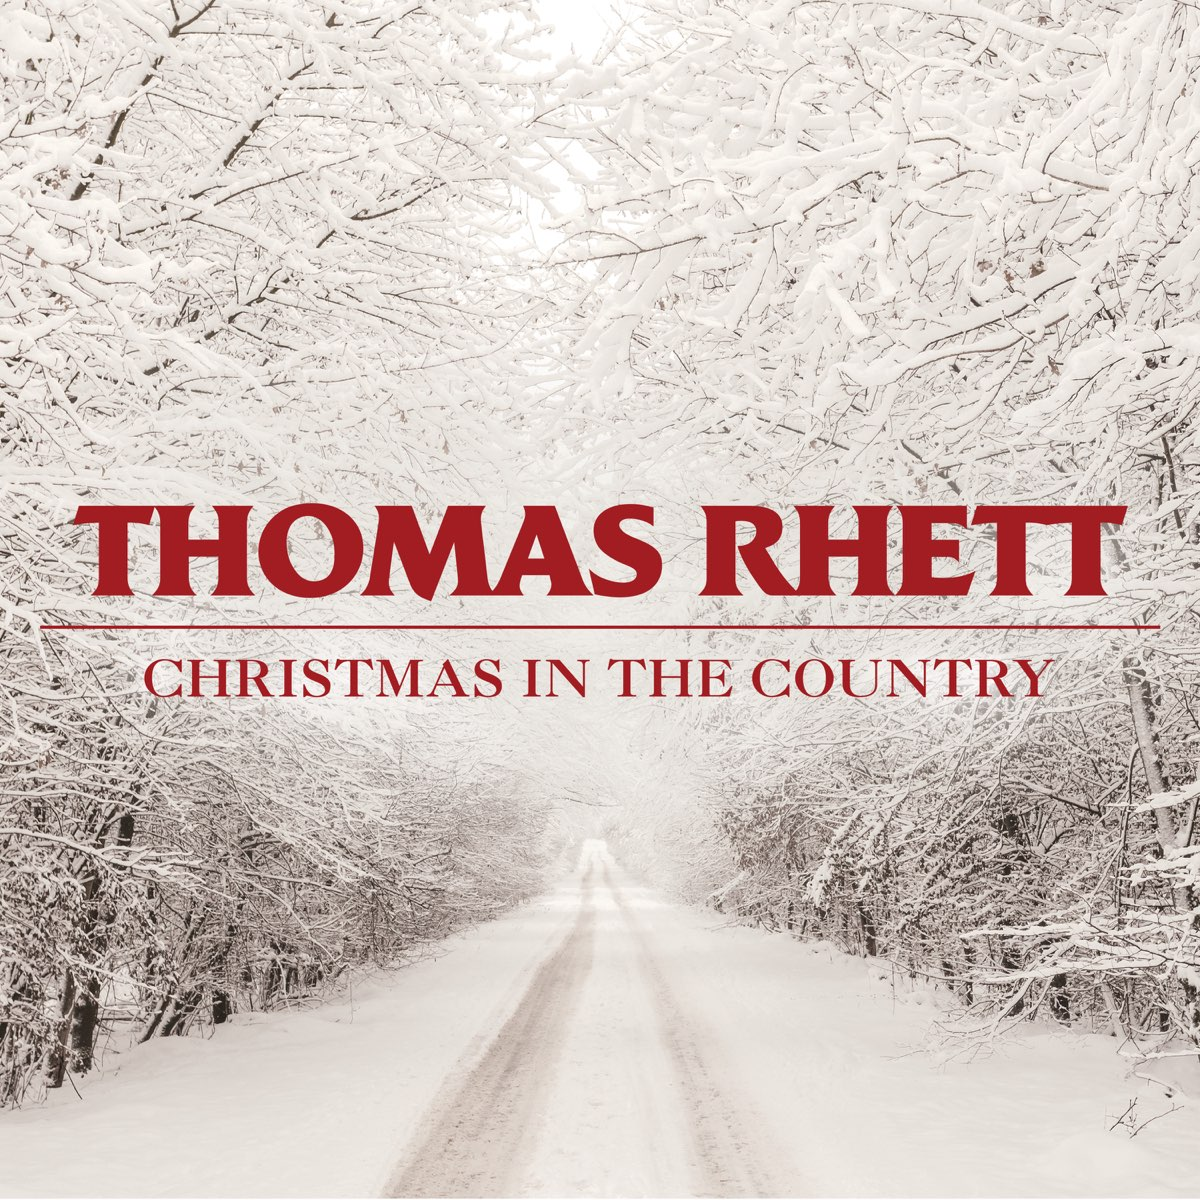 Best Christmas Songs - Christmas in the Country